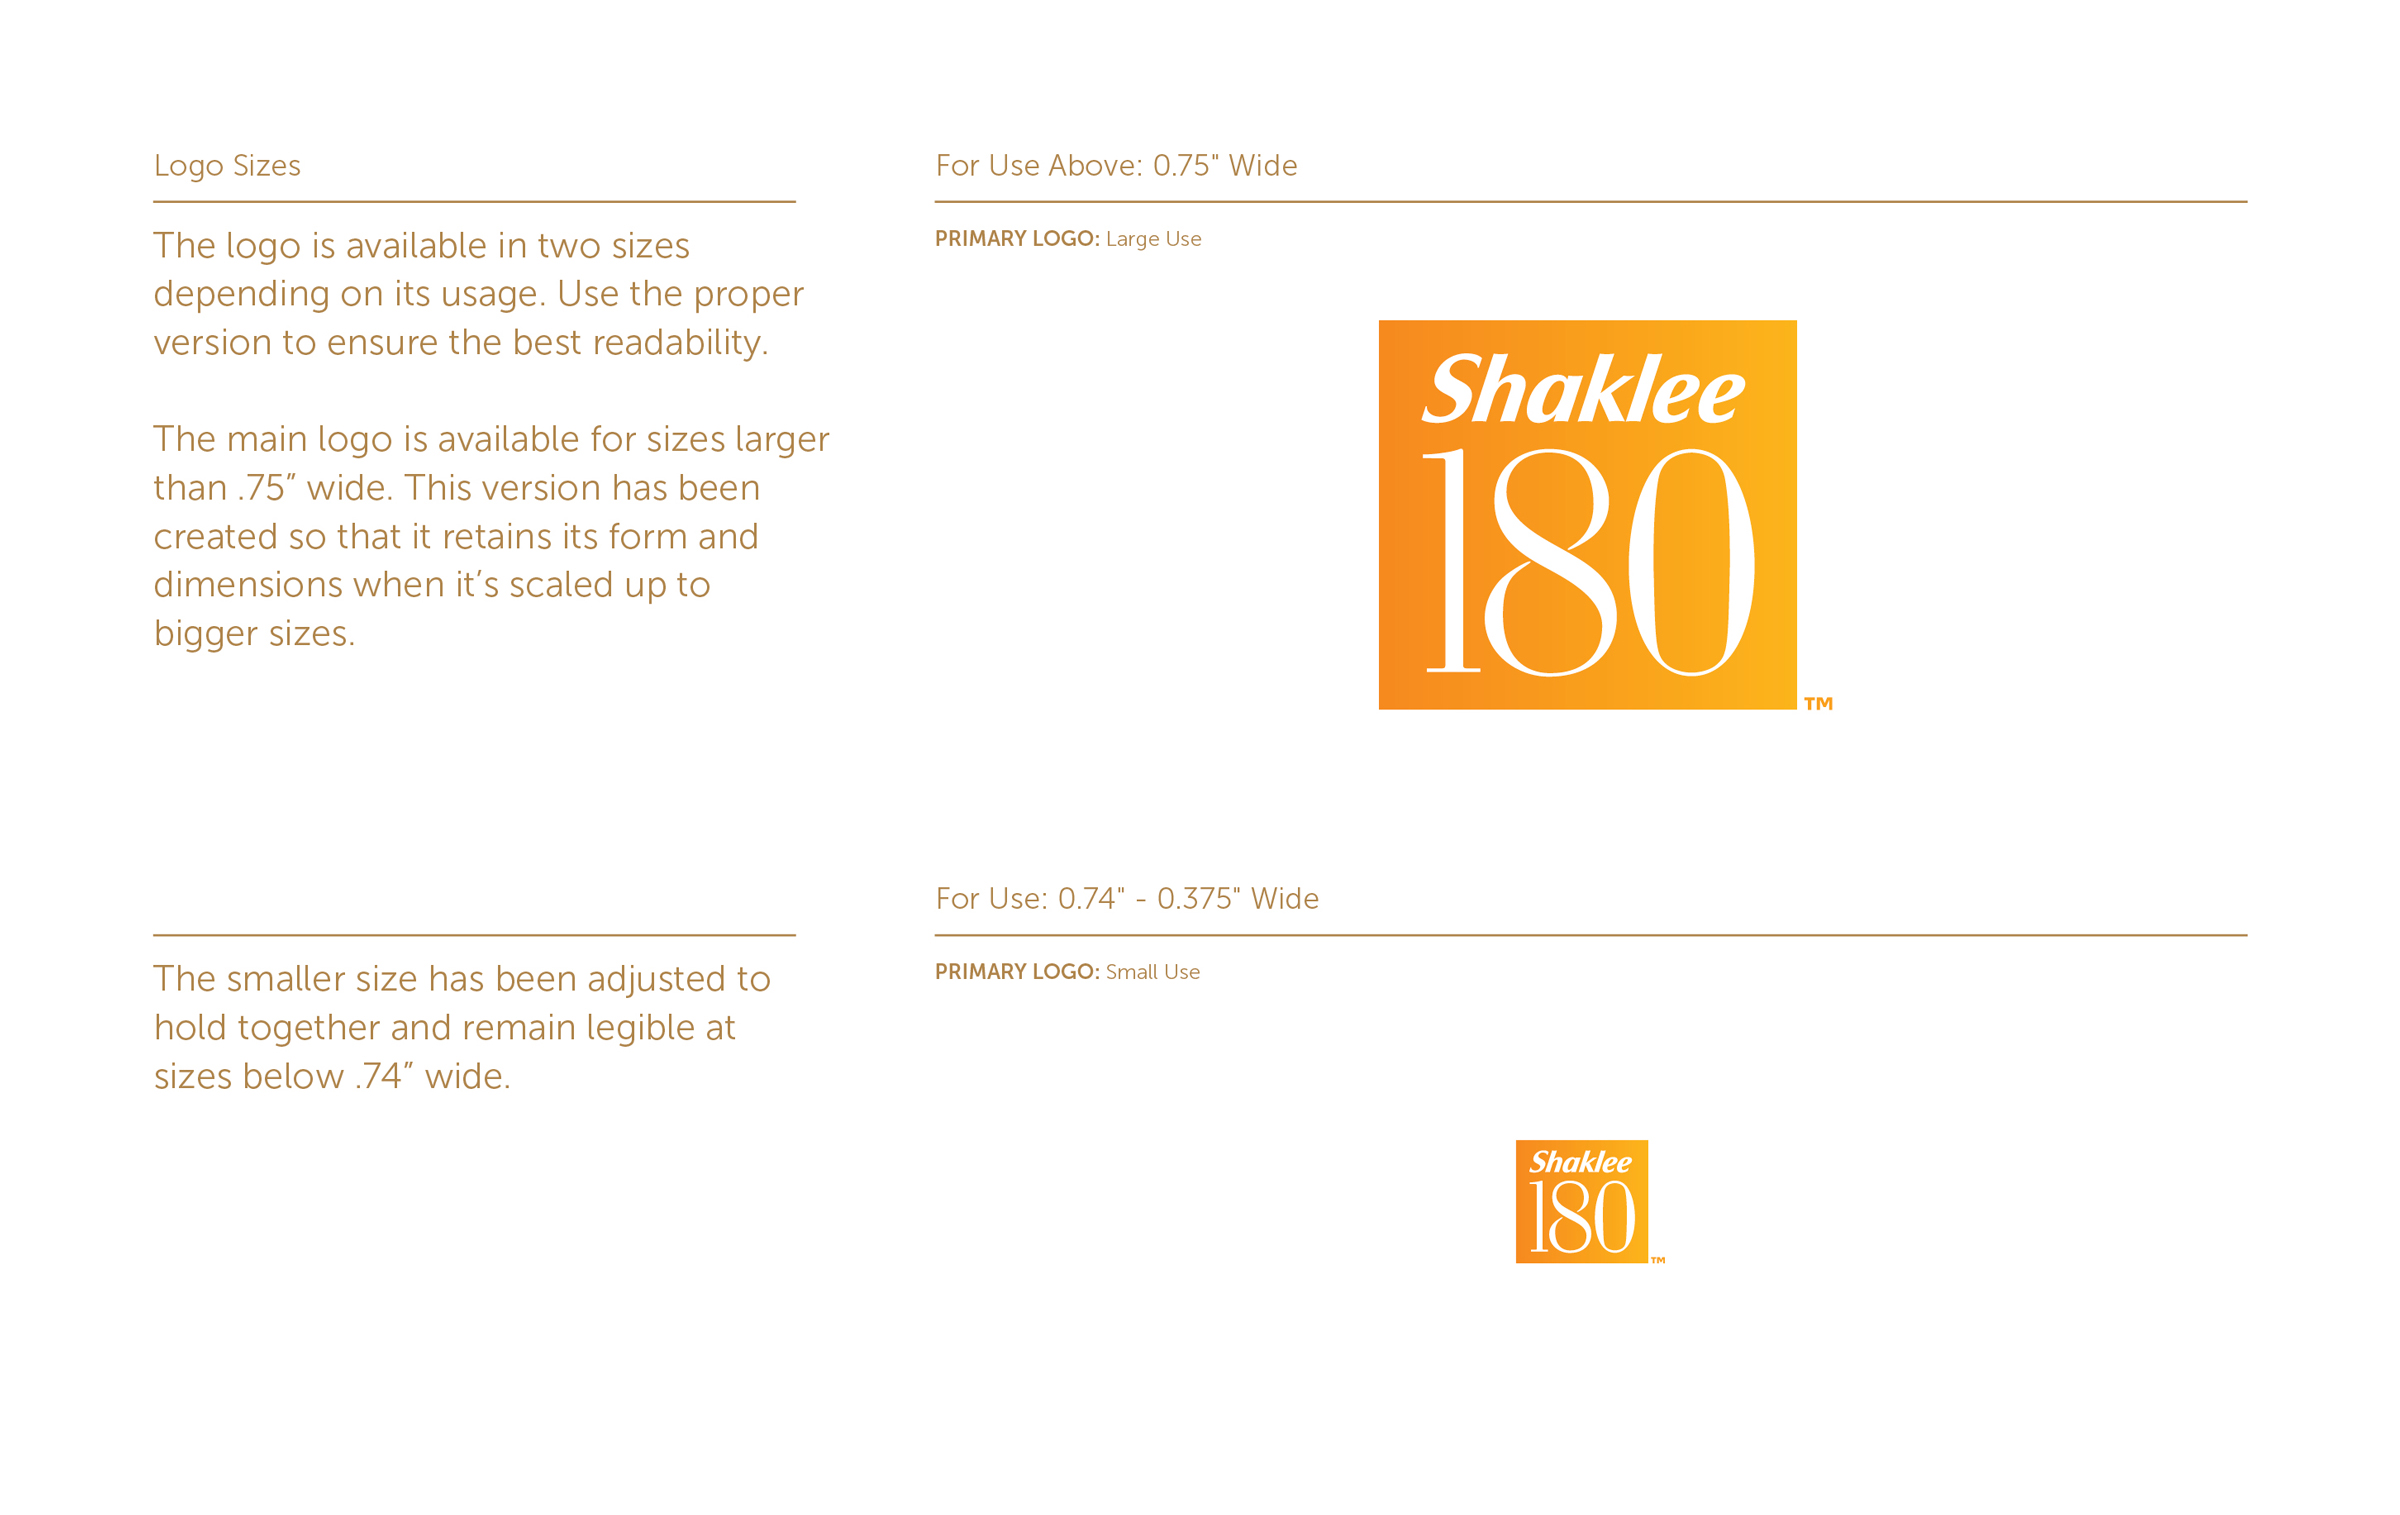 Shaklee180_Style_Guide11